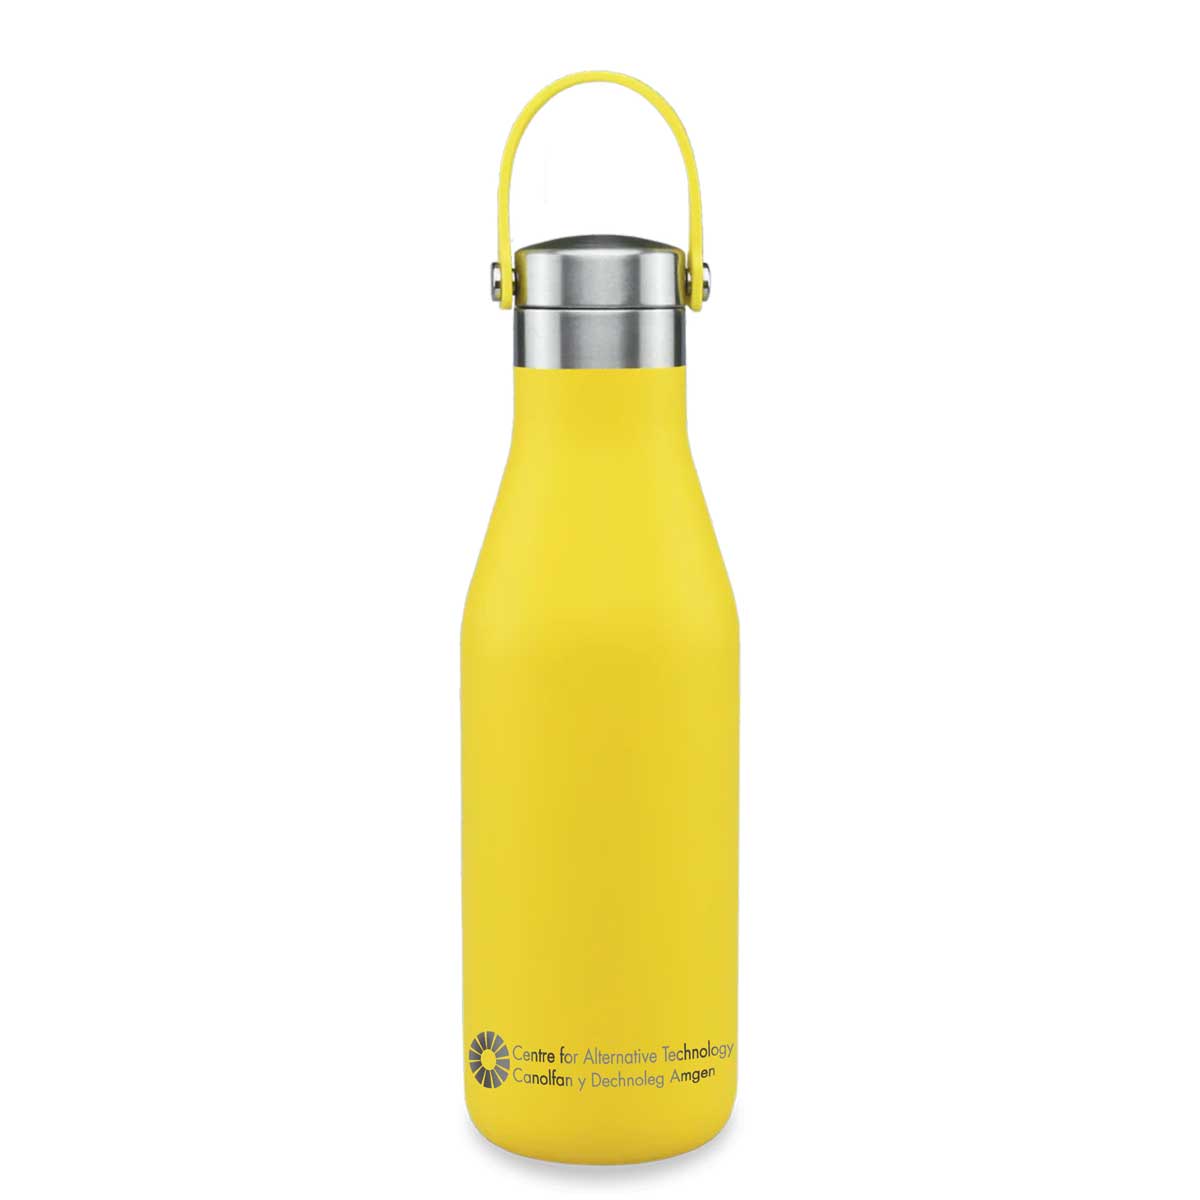 Ohelo Insulated Water Bottle with CAT logo.